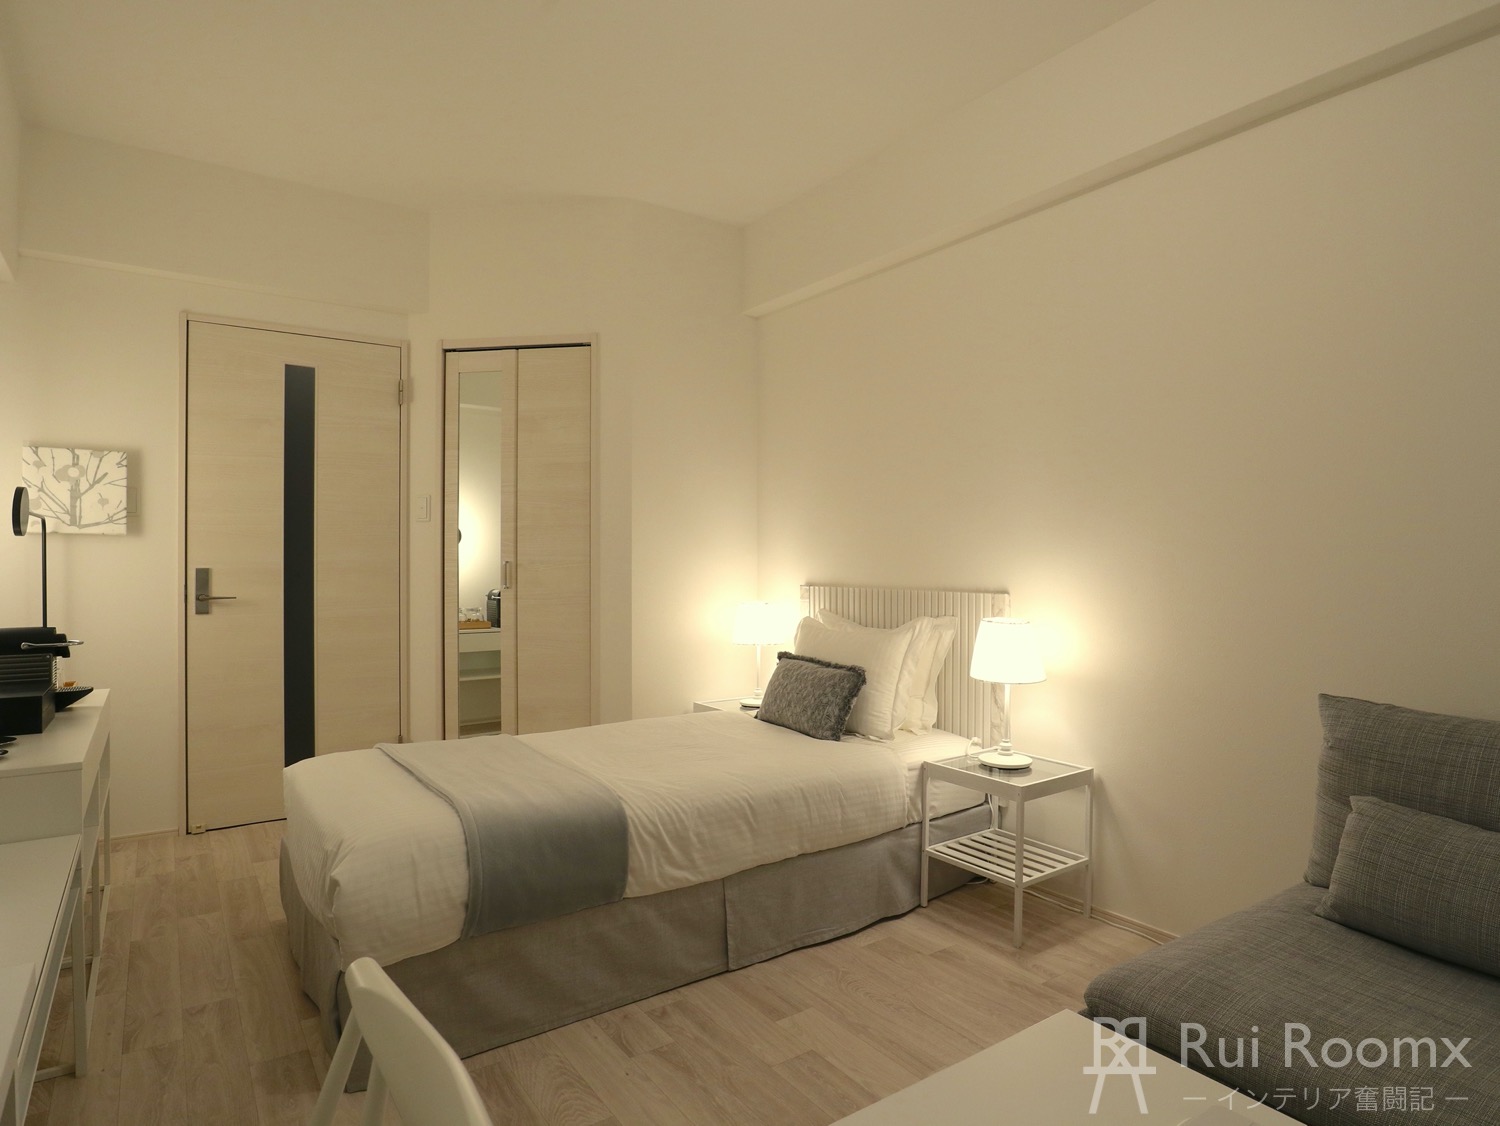 ruiroomx-room hotellike interior bed-place